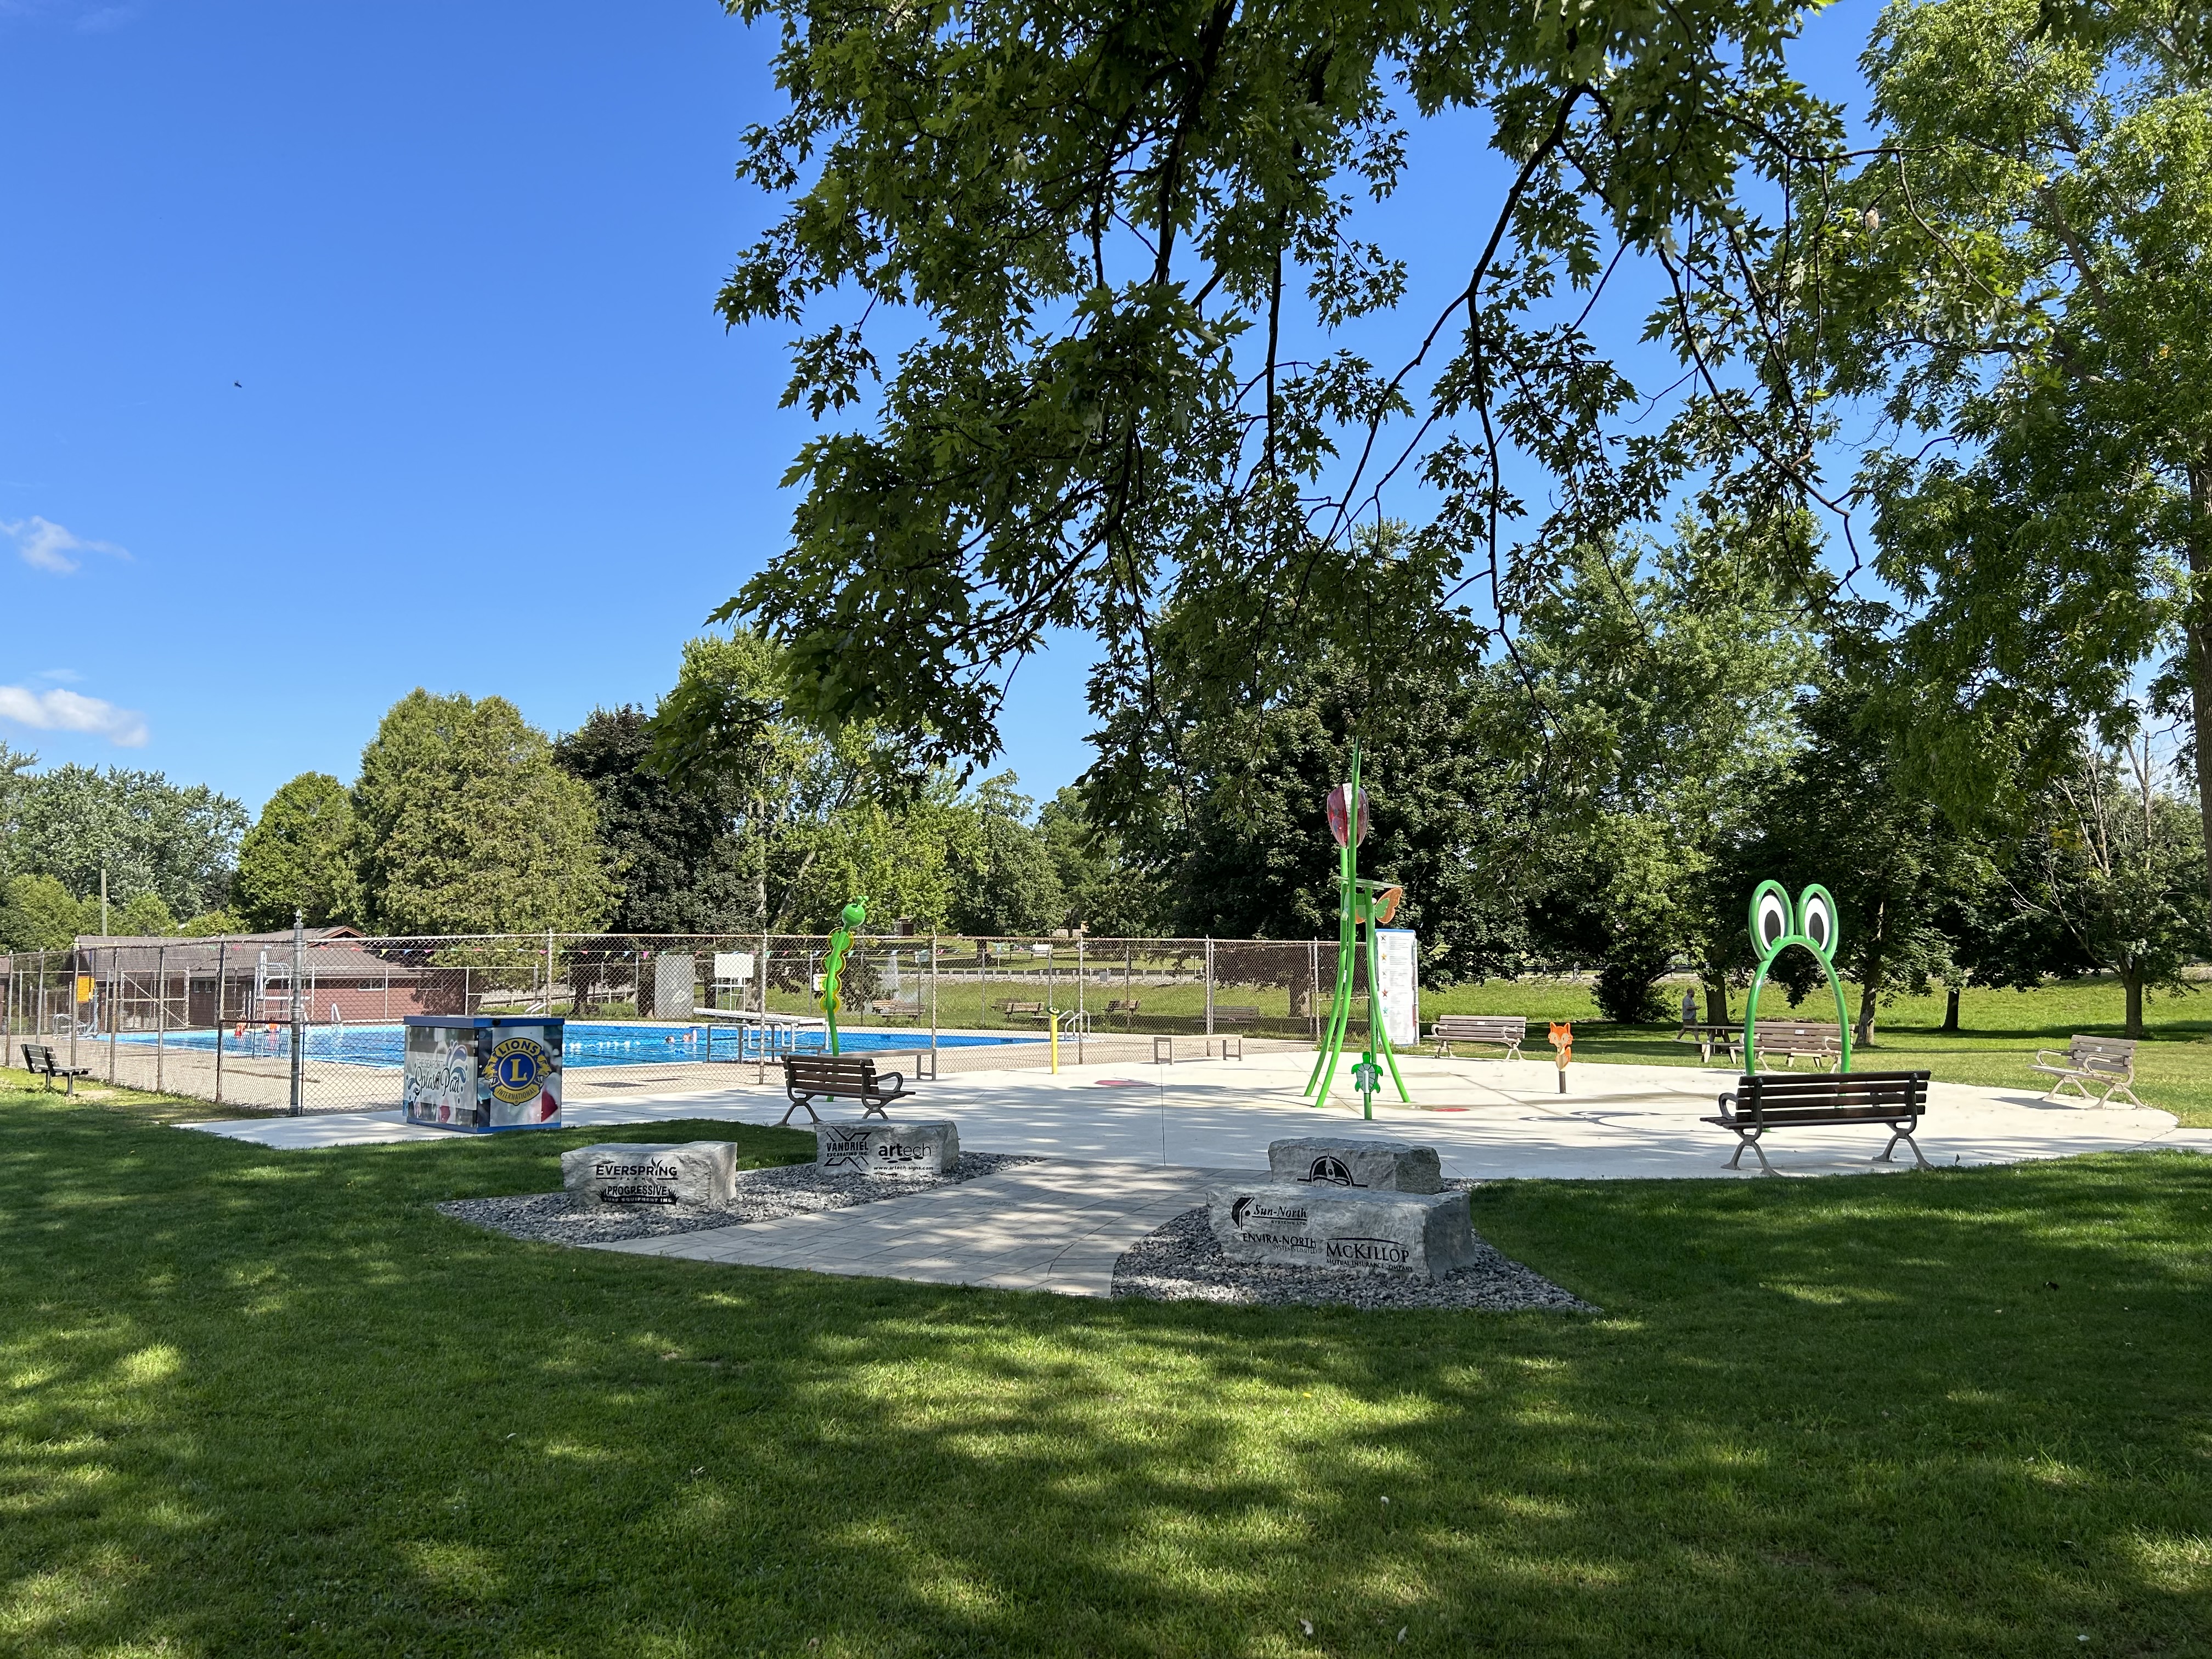 A picture of the splash pad and pool at the Seaforth Lions Park.